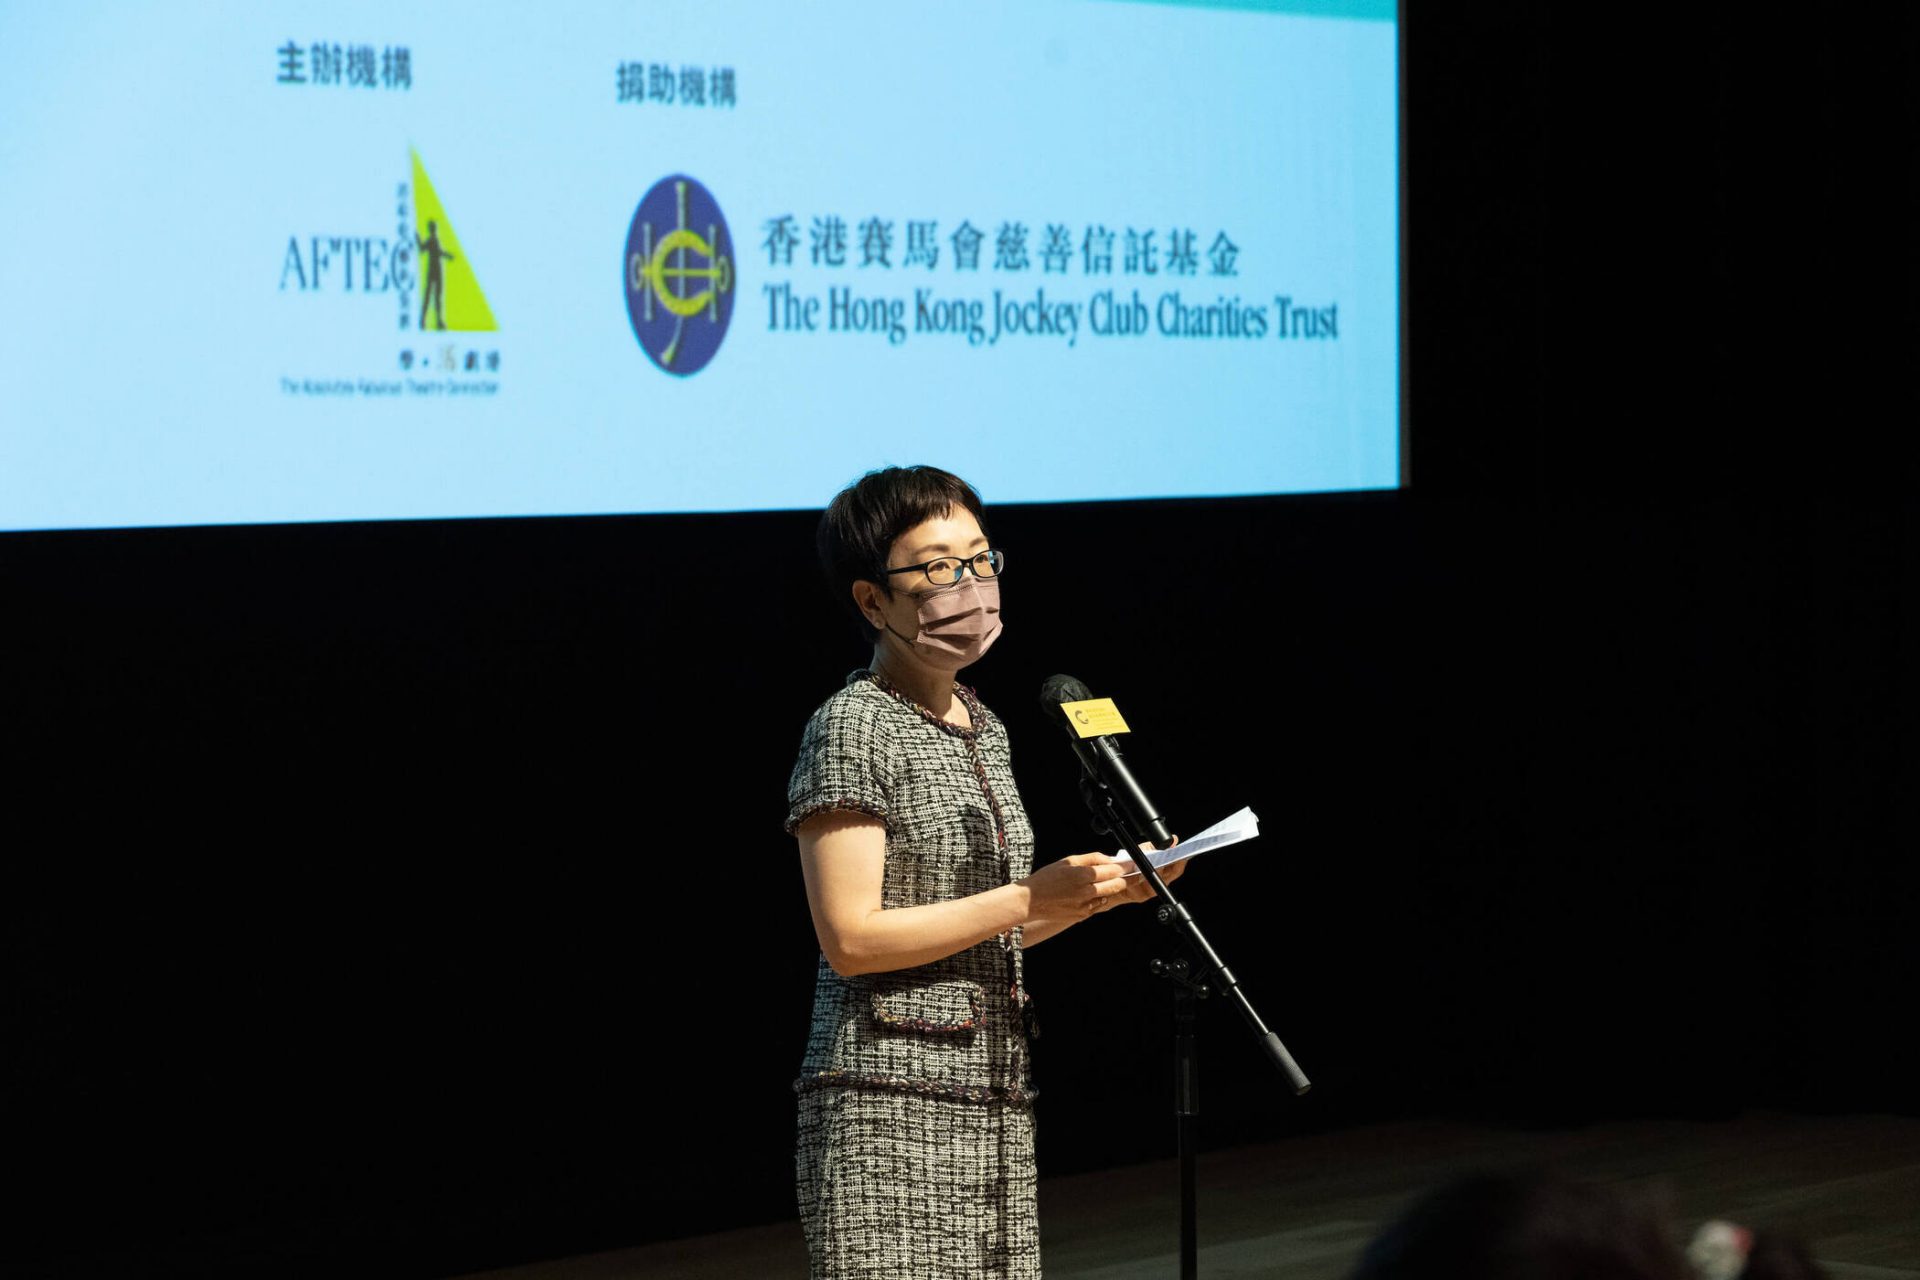 Winnie Yip (Executive Manager, Charities (Grant Making – Arts, Culture, Heritage and Talent Development) of The Hong Kong Jockey Club)